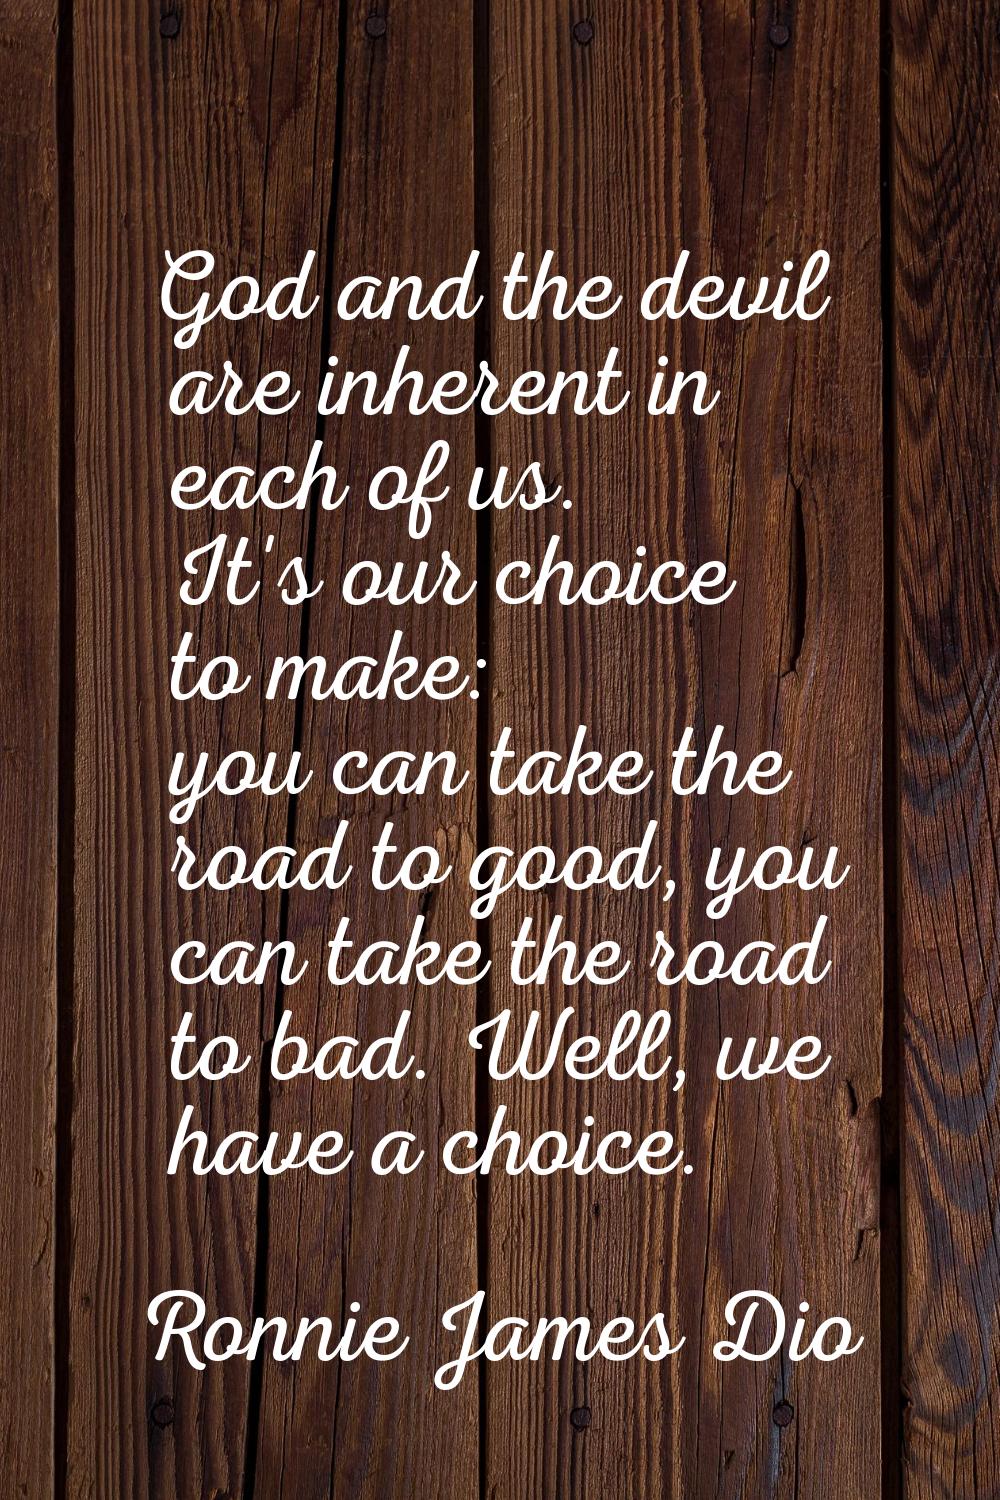 God and the devil are inherent in each of us. It's our choice to make: you can take the road to goo